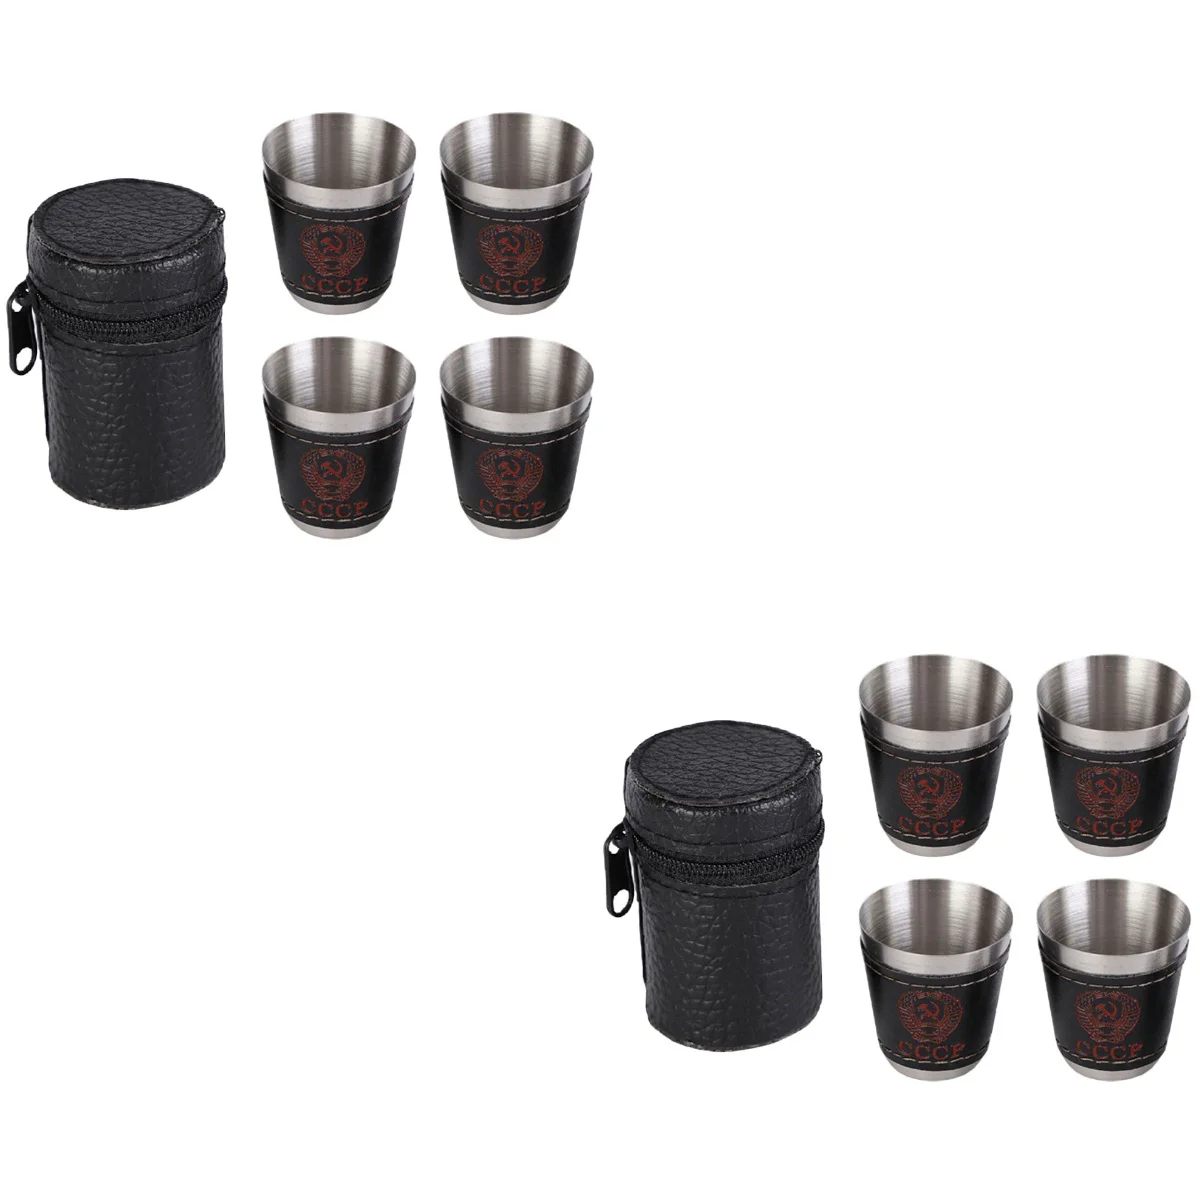 

Cups Drinking Shot Steel Stainless Metal Gift Barware Tequila Whiskey Shooters Unbreakable Nesting Espresso Coffee Travel Cup